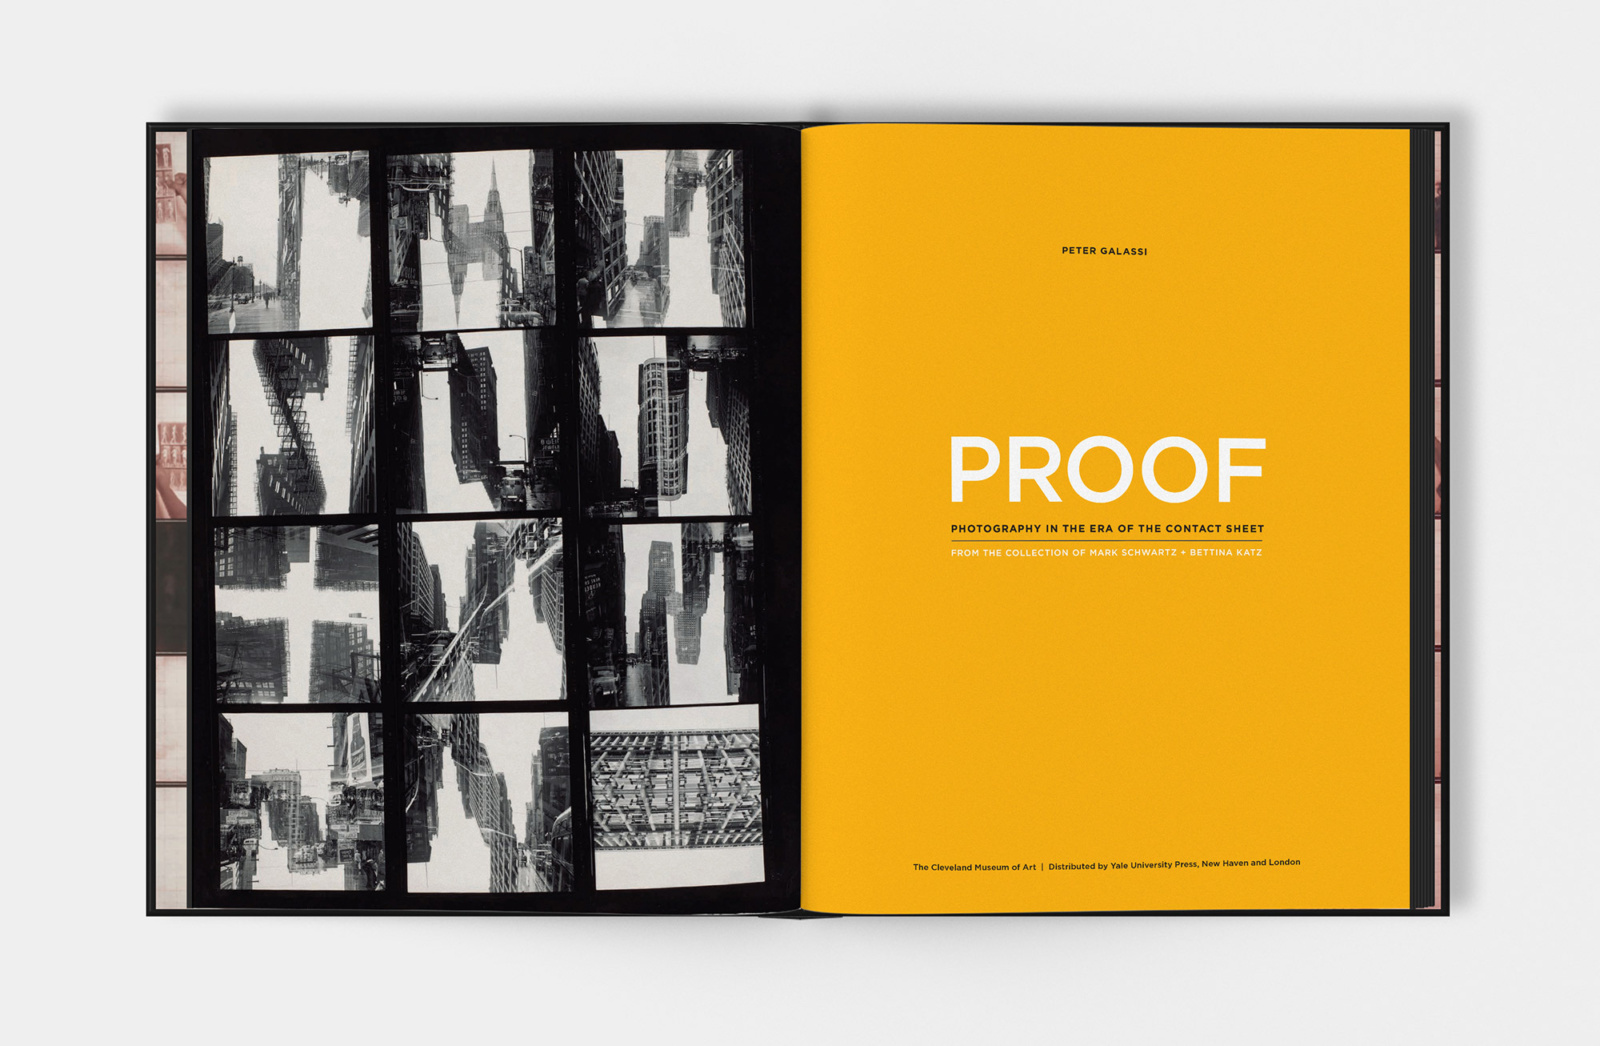 PROOF book design spread, showing a contact sheet on the left and title page on the right